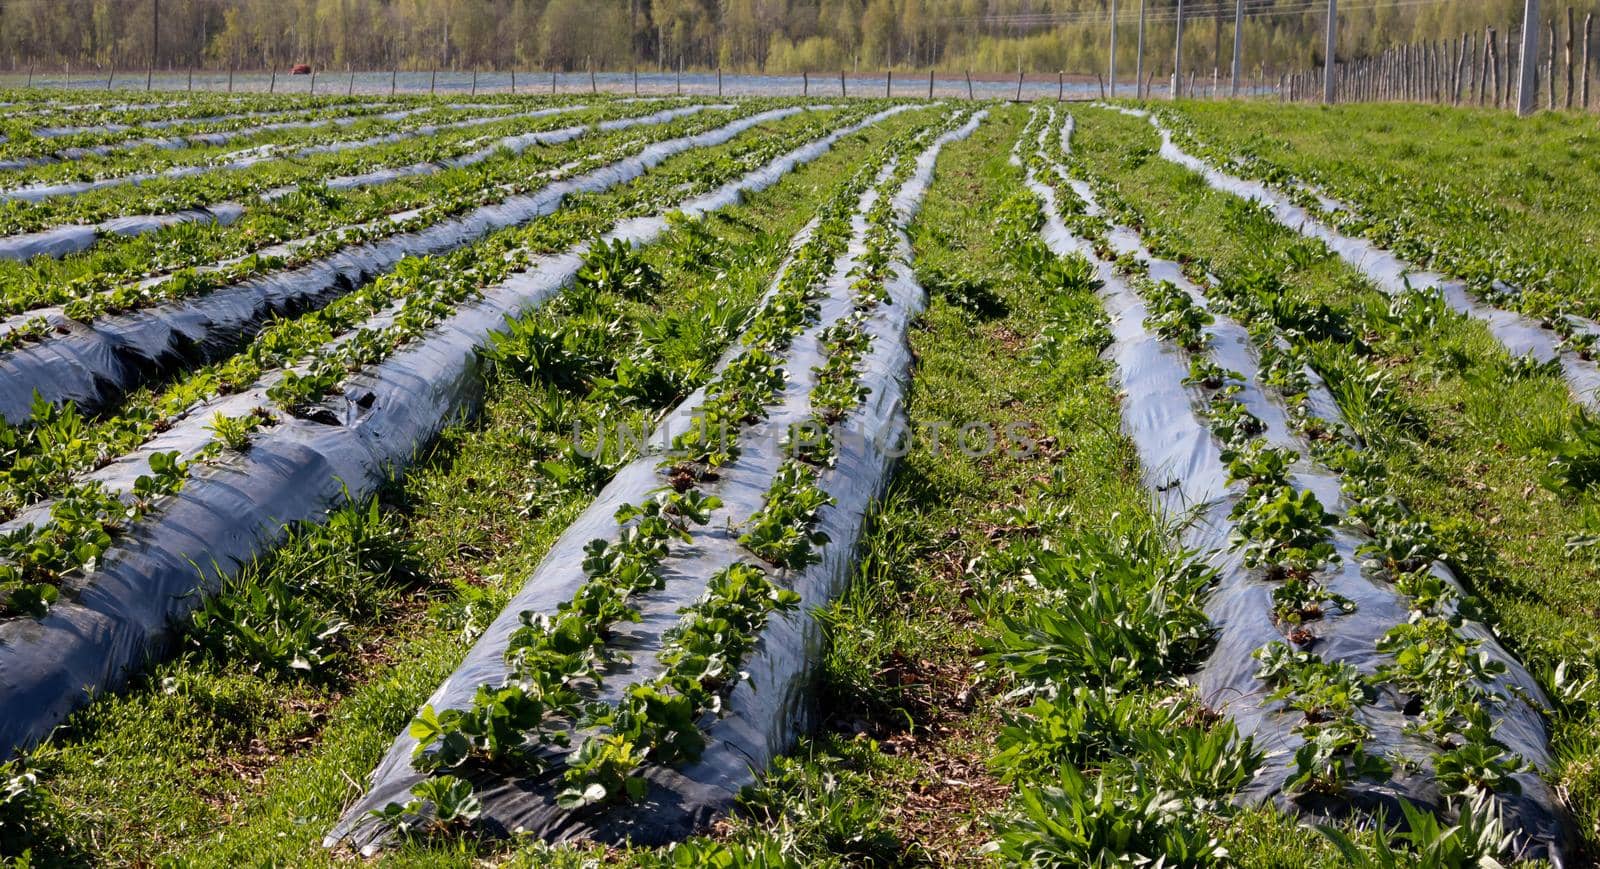 Plantations of young strawberry plants growing outdoors on soil covered with plastic wrap by lapushka62